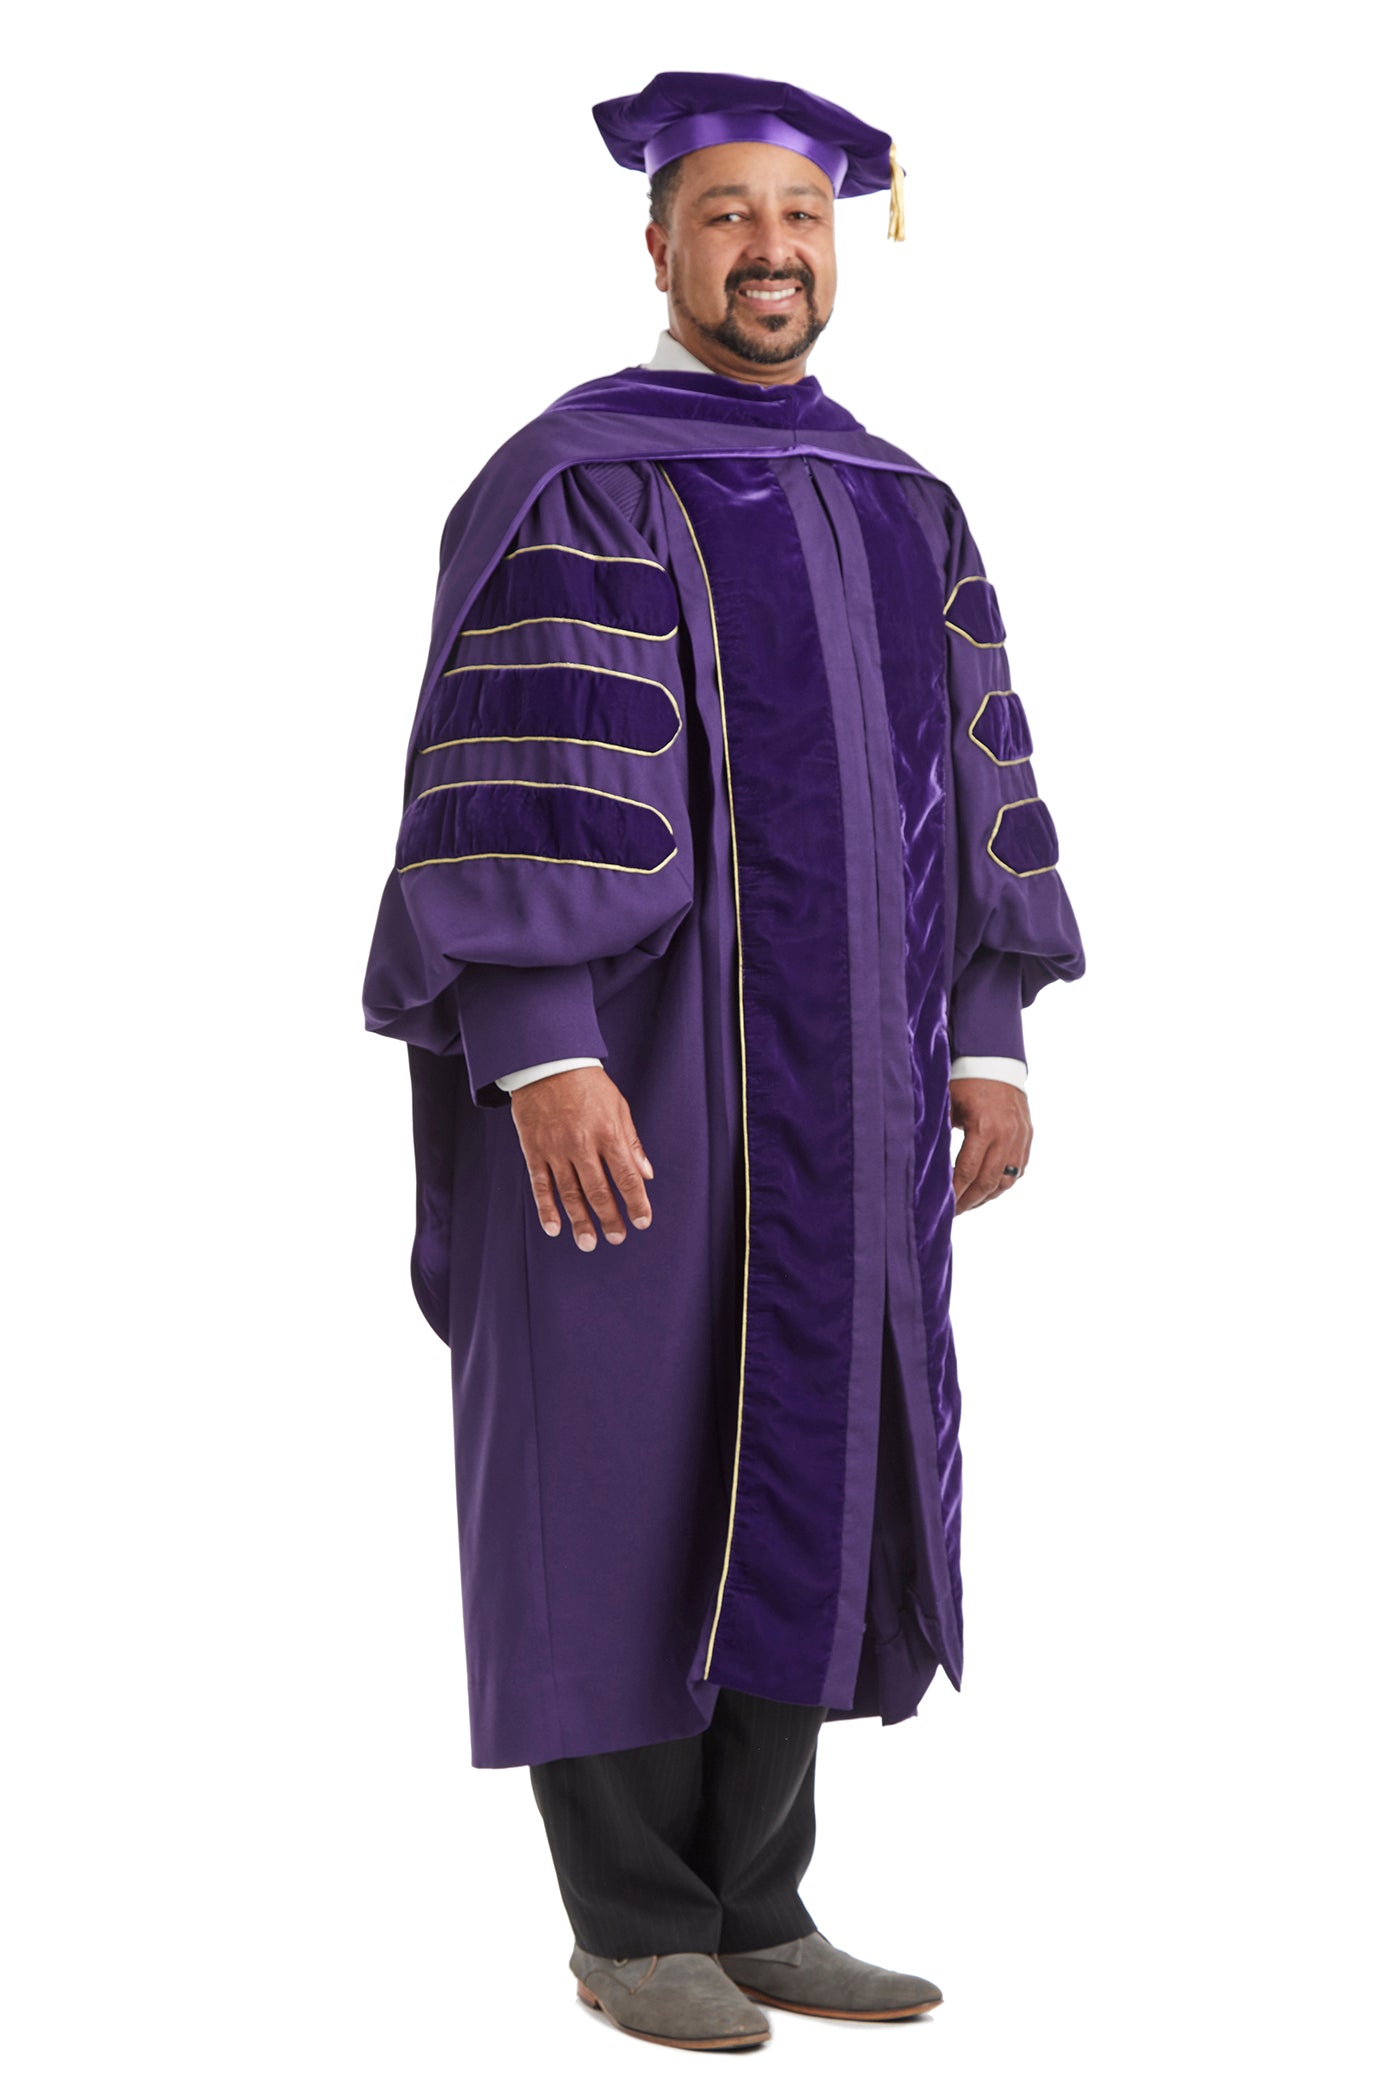 University of Washington PhD Regalia Set. Doctoral Gown, Hood, and Eight Sided Doctoral Tam with Tassel